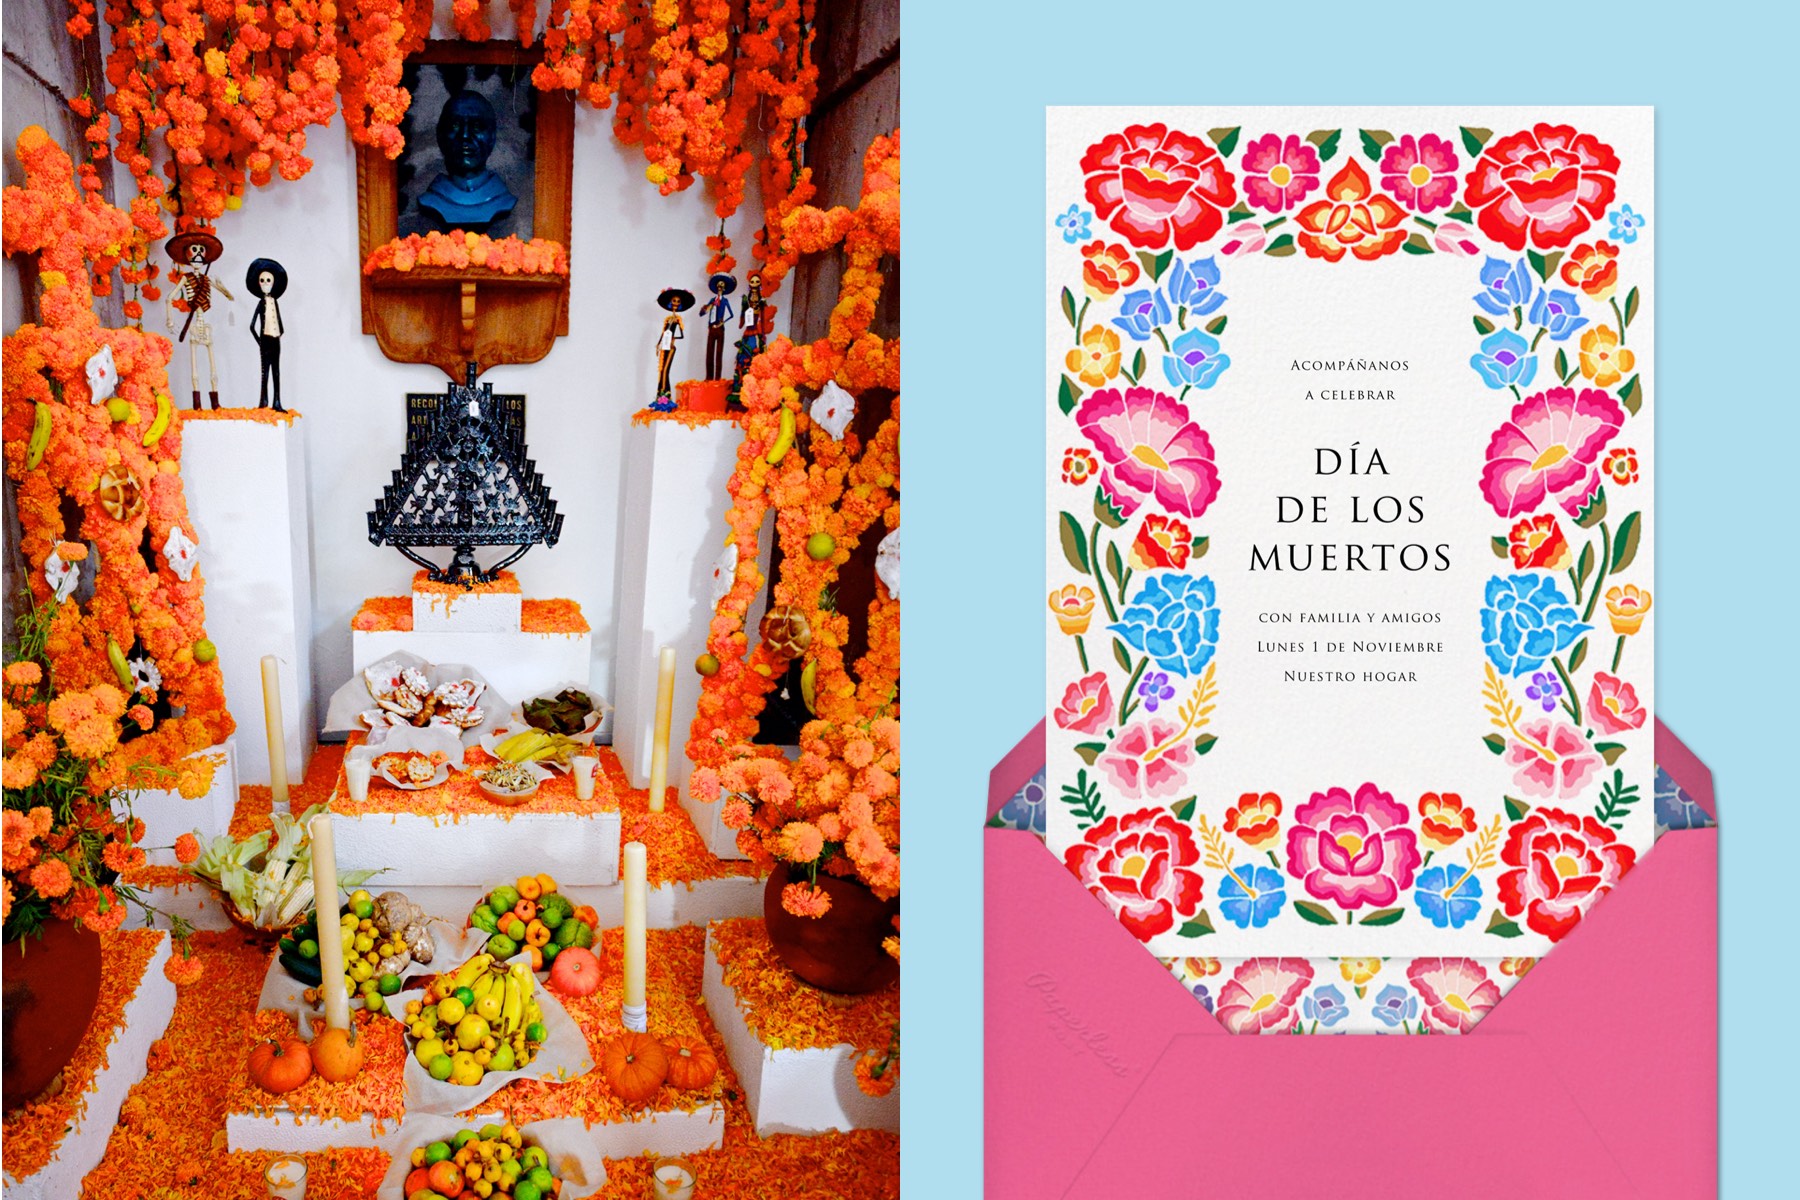 Left: A Mexican gravesite decorated with orange flowers, fruit, and ofrendas. Right: A card with colorful marigold flowers around the border. 